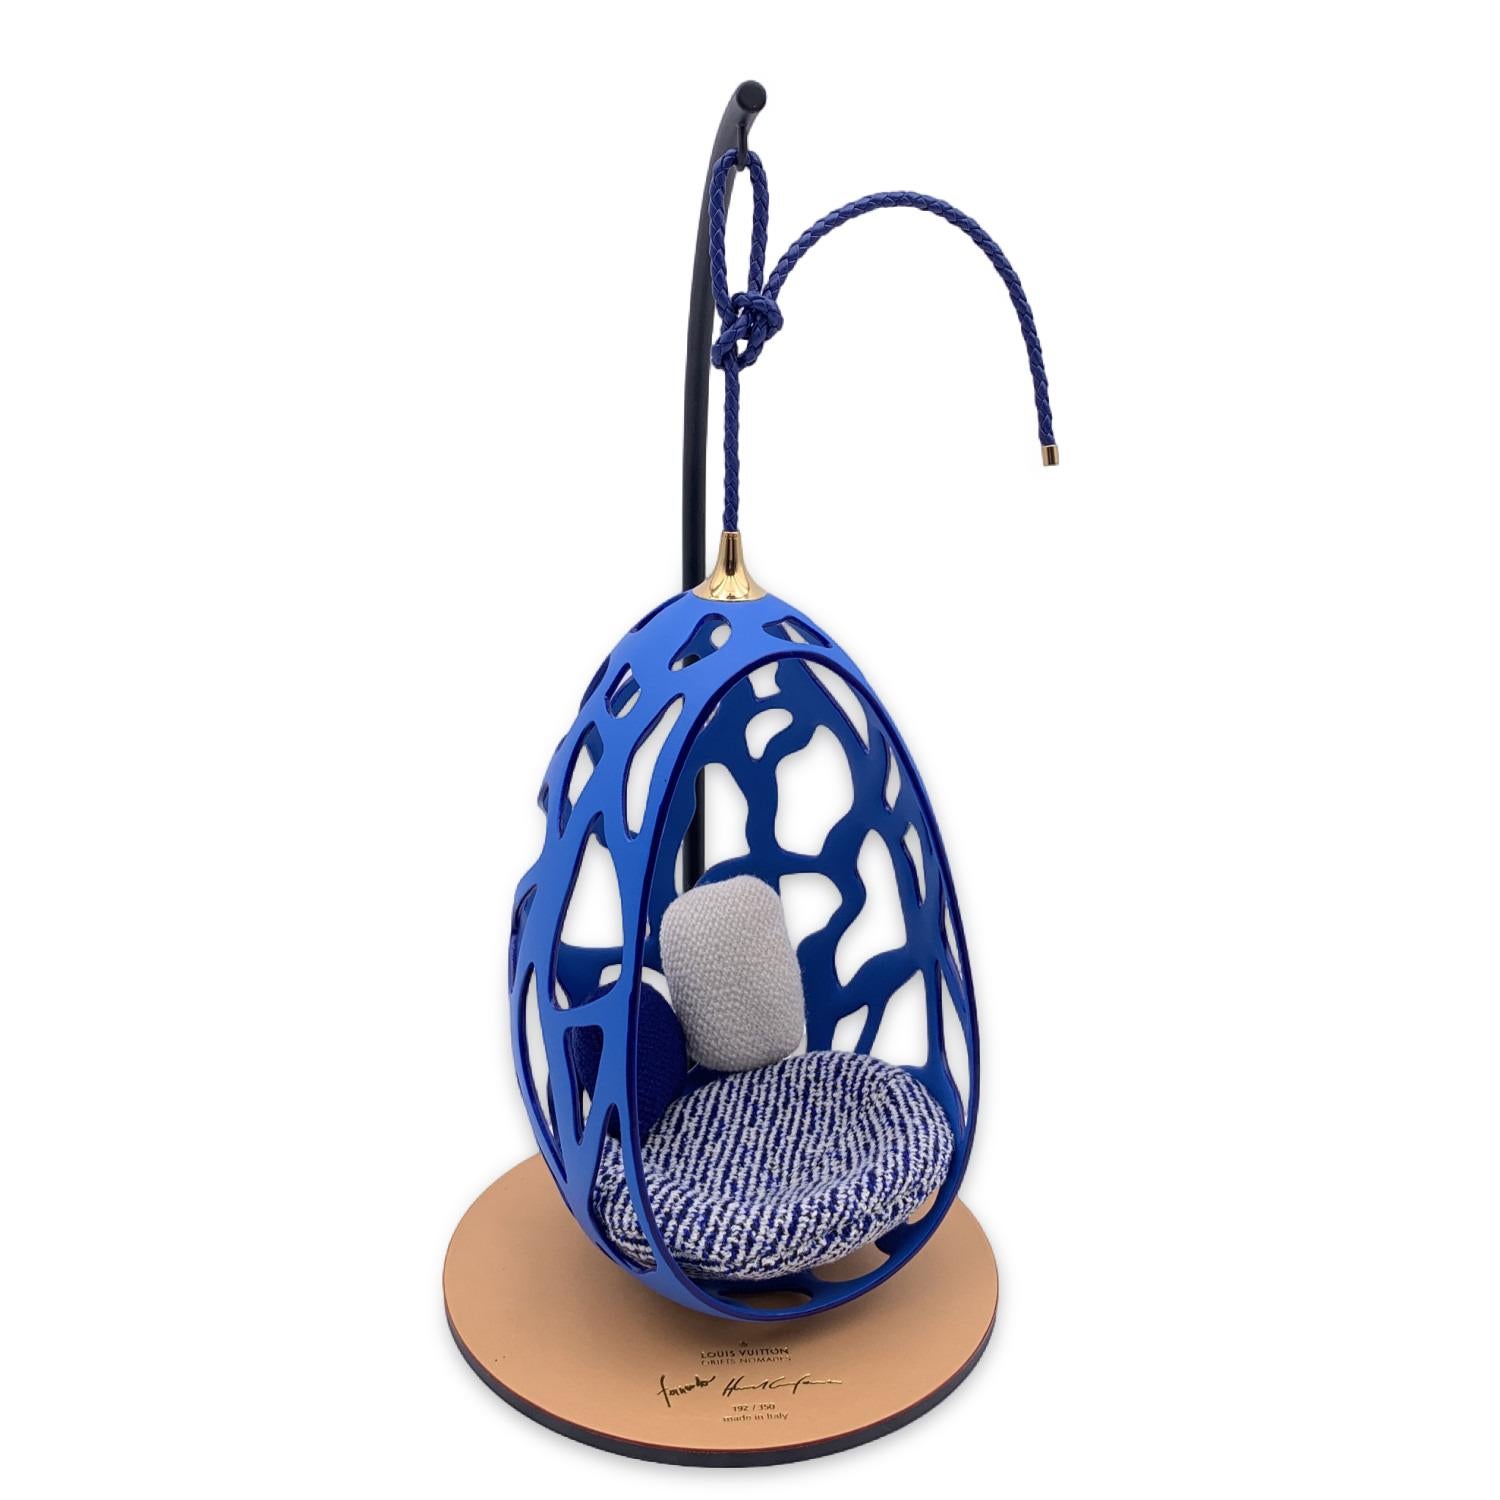 Limited edition Louis Vuitton miniature of the design chair named 'Cocoon'. Designed by Fernando & Humberto Campana, from the 'Objets Nomades' Collection. Numbered edition, this fine example is 192/350. This is a 1:6 scale model of the full size